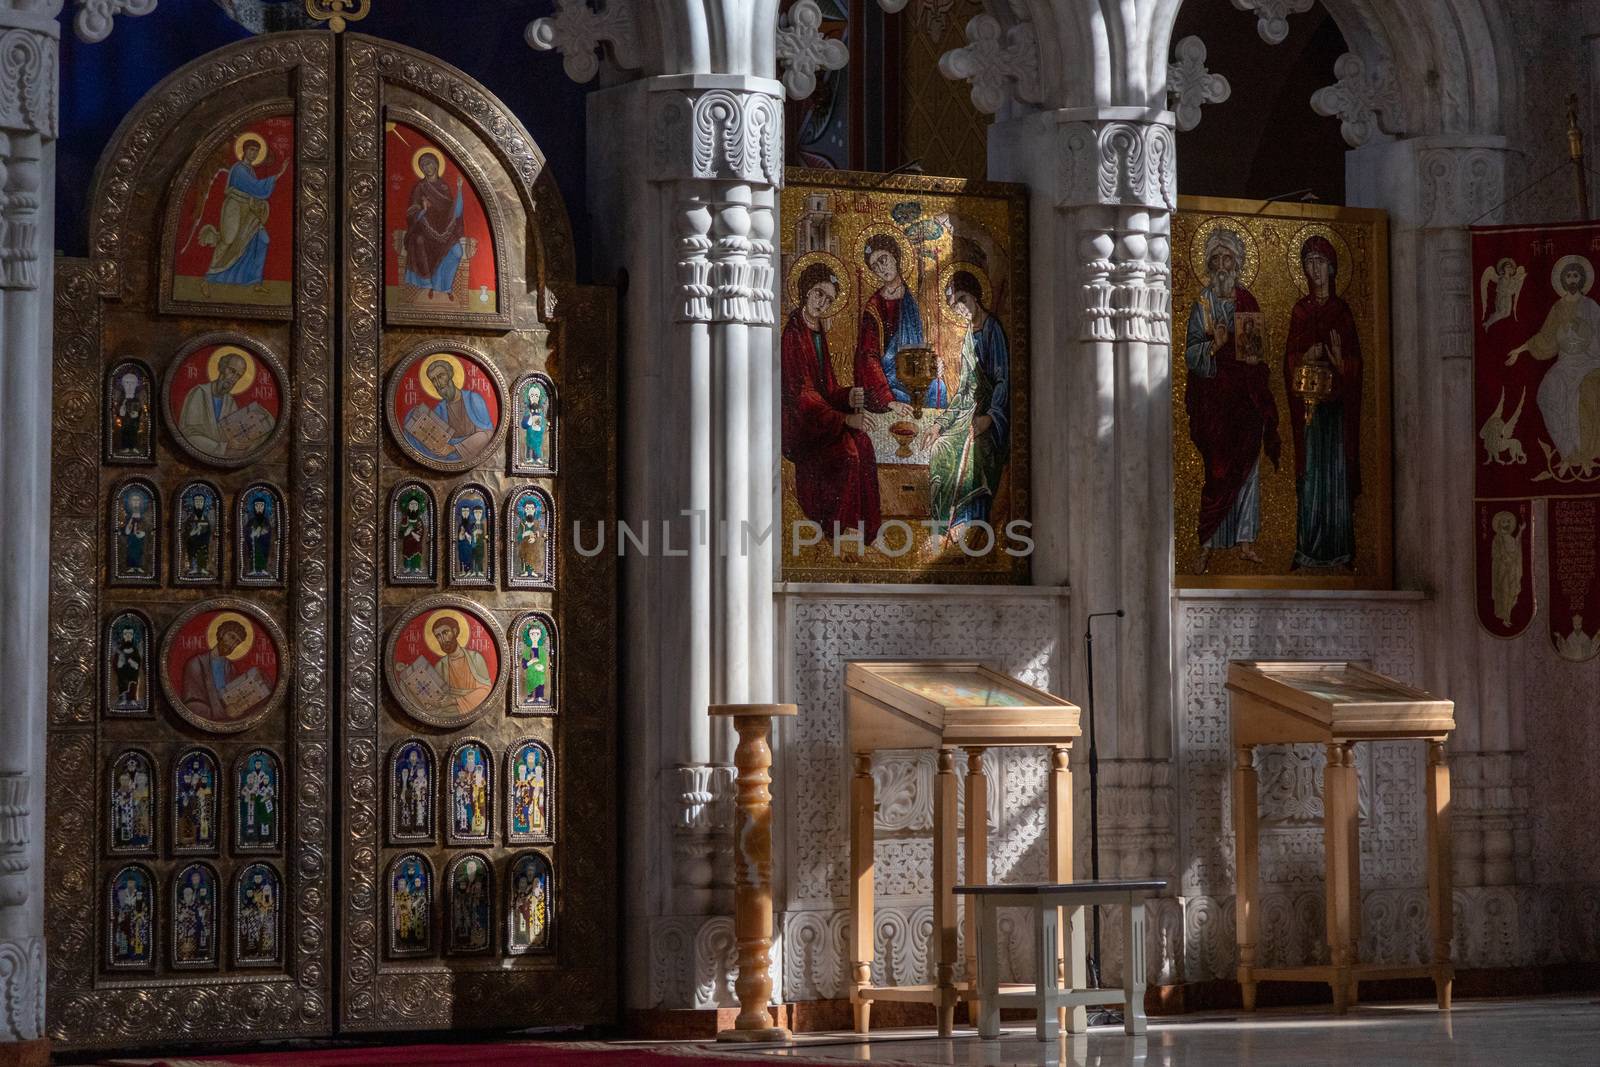 Holy Trinity Cathedral of Tbilisi, Georgia Interior is the main cathedral of the Georgian Orthodox Church Constructed between 1995 and 2004, it is the third-tallest Eastern Orthodox cathedral in the world and one of the largest religious buildings in the world by total area Beautiful icons and architecture 9/10/2019. High quality photo